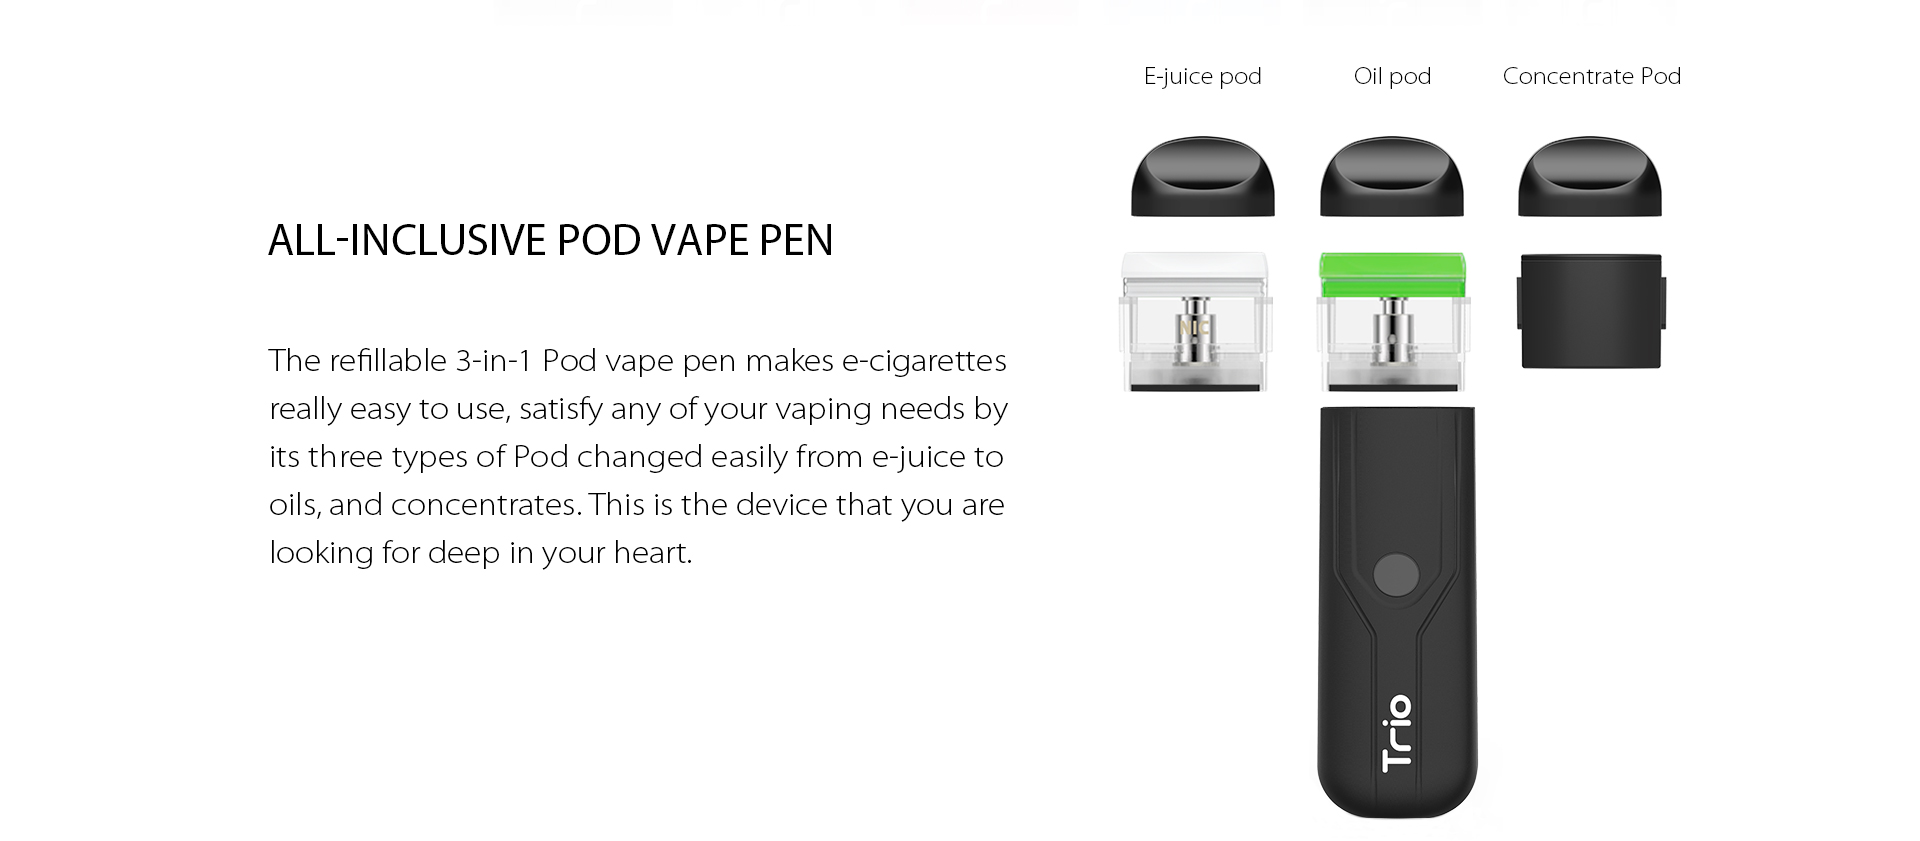 The refillable 3-in-1 Pod vape pen makes e-cigarettes really easy to use, satisfy any of your vaping needs by its three types of Pod changed easily from e-juice to oils, and concentrate.